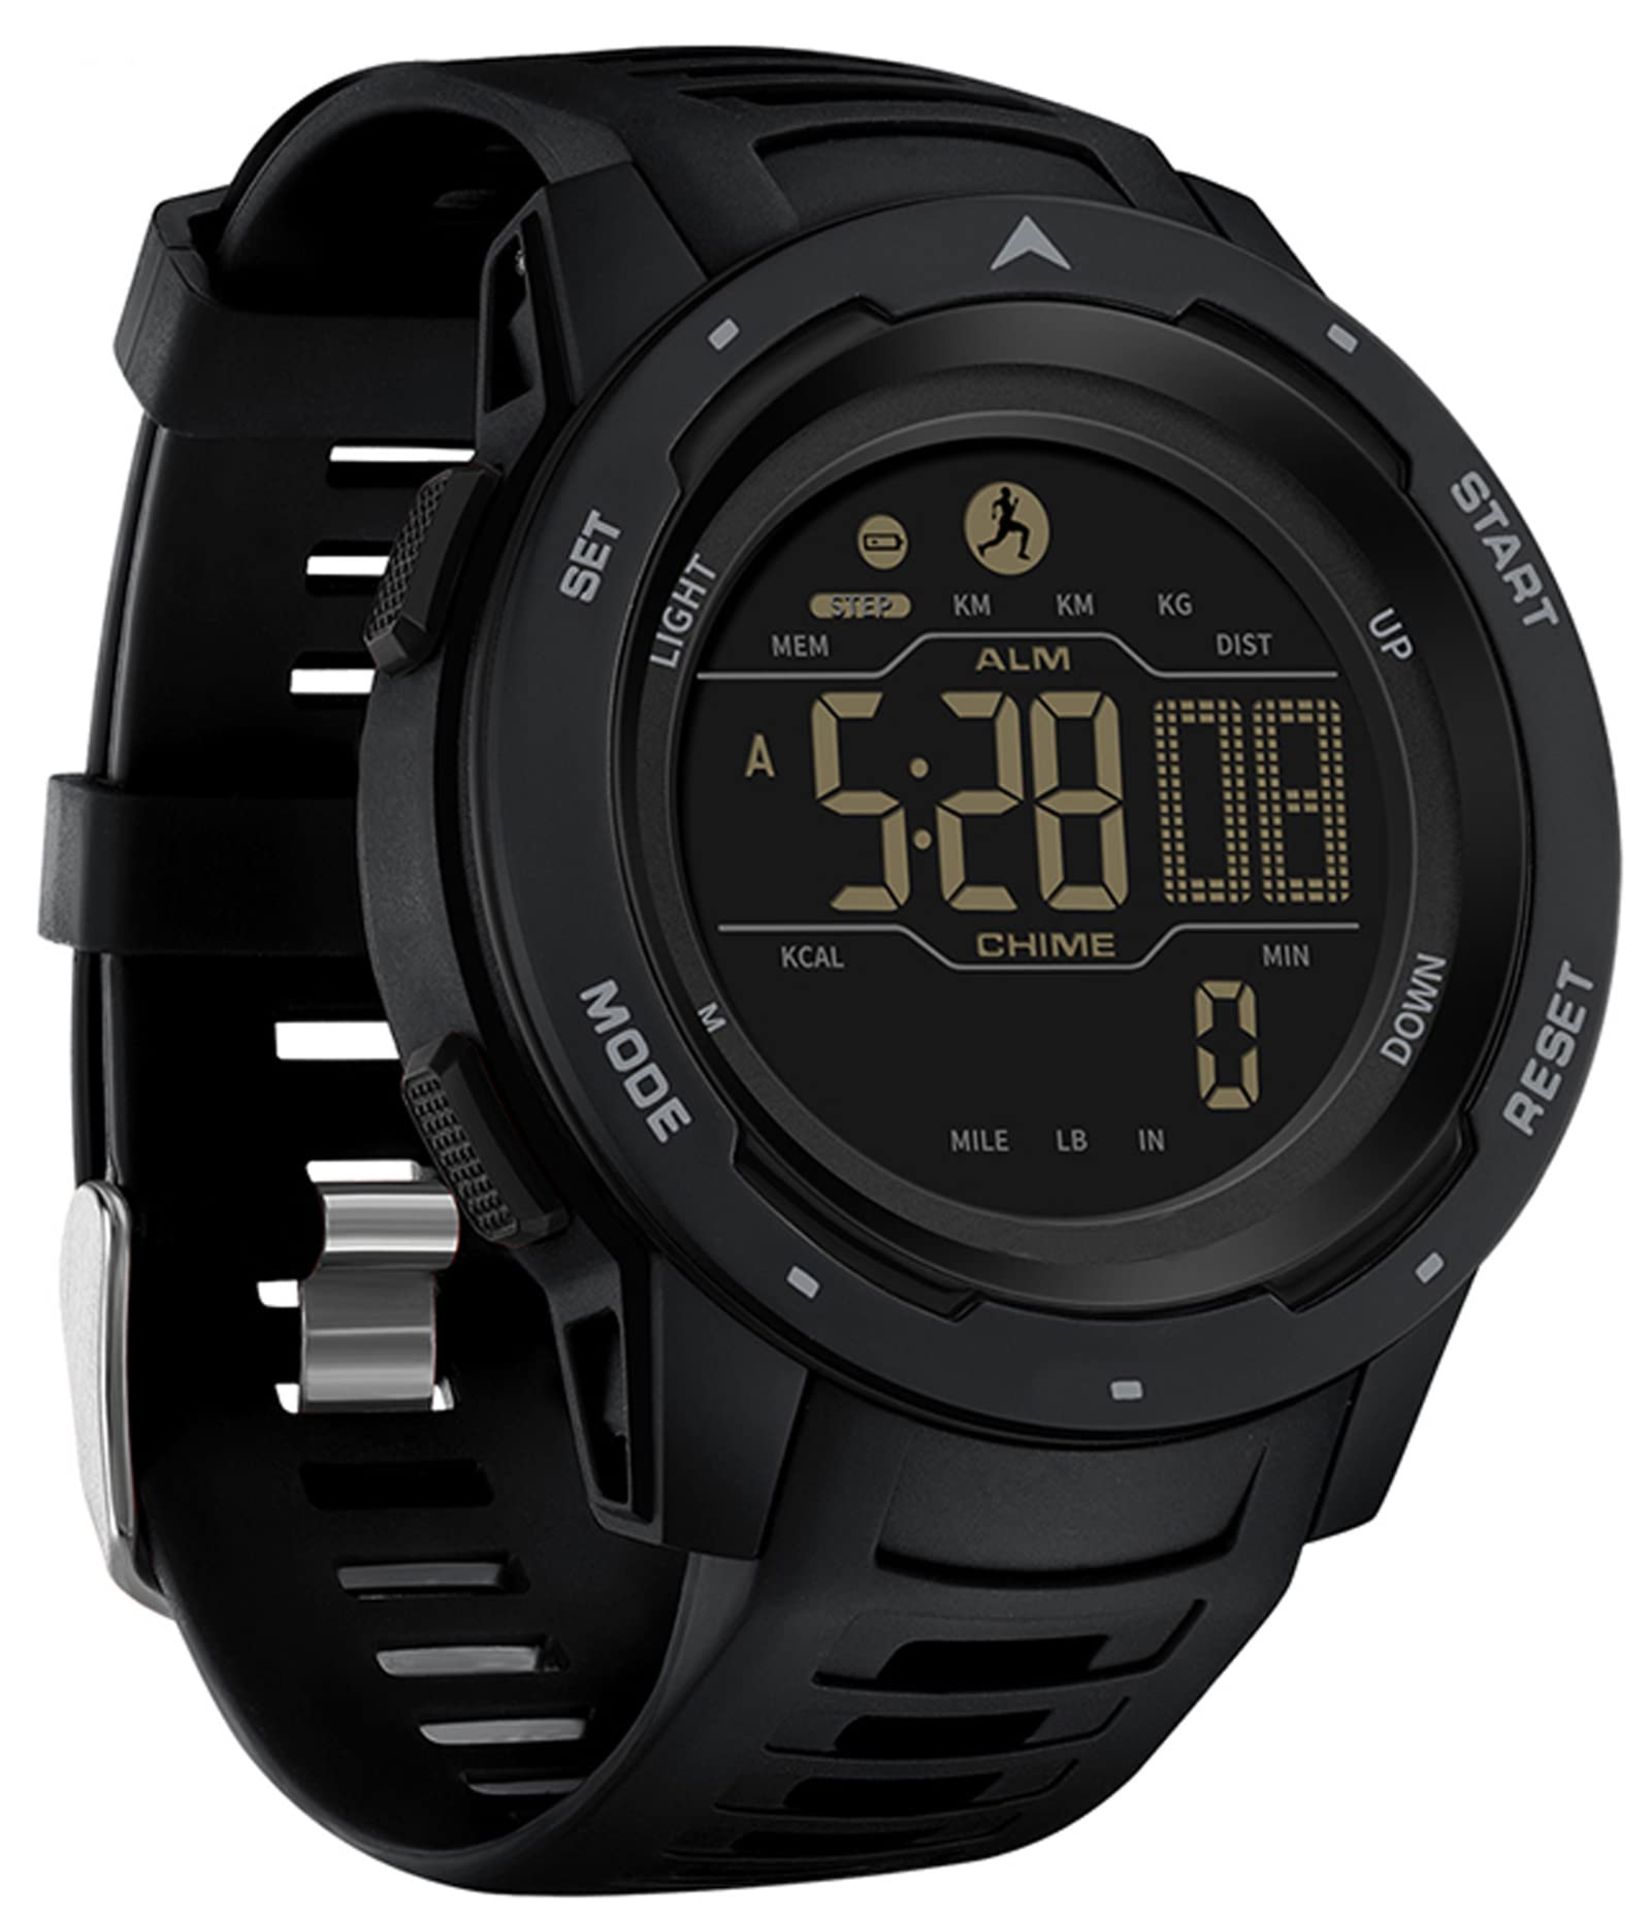 RRP £27.39 Mens Digital Watch Military Watches for Men Step Calorie